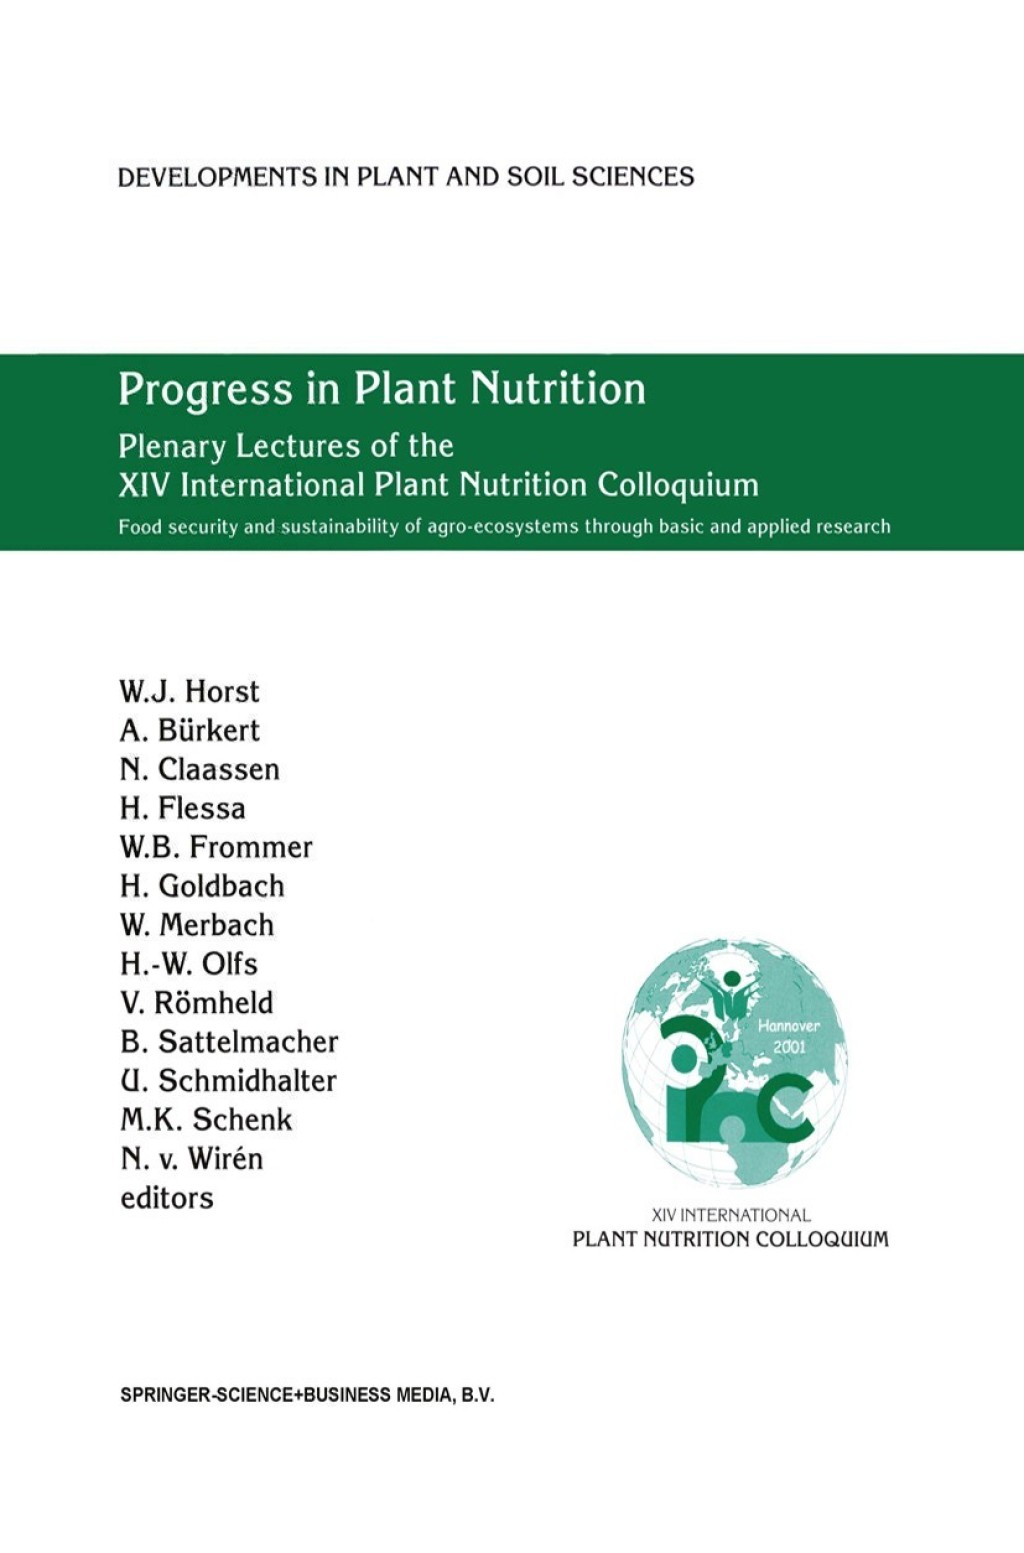 Progress in Plant Nutrition: Plenary Lectures of the XIV International Plant Nutrition Colloquium - 1st Edition (eBook Rental)